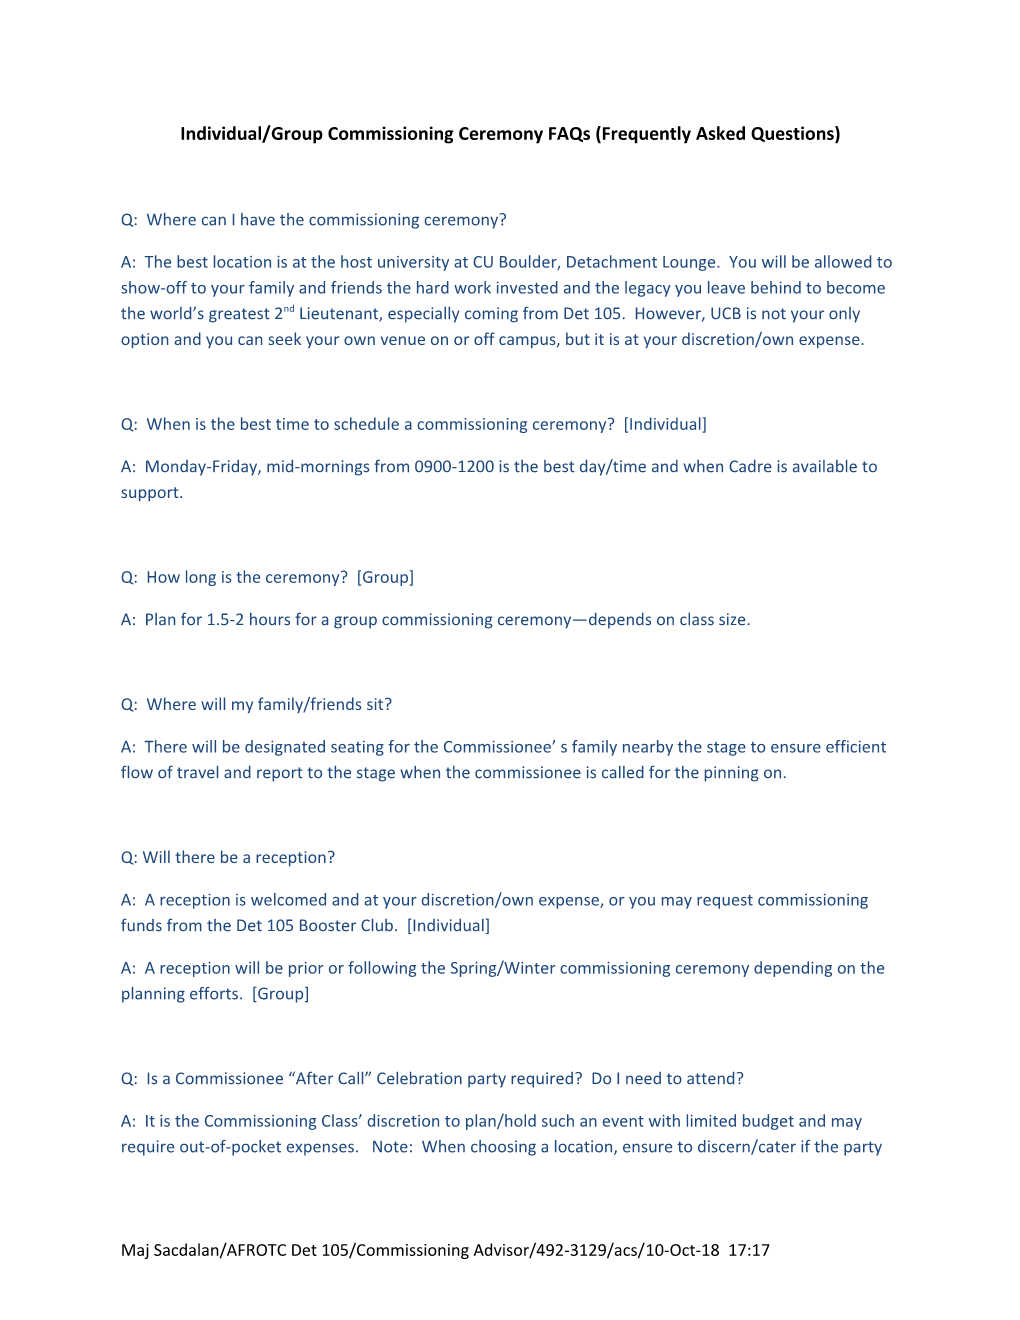 Individual/Group Commissioning Ceremony Faqs (Frequently Asked Questions)